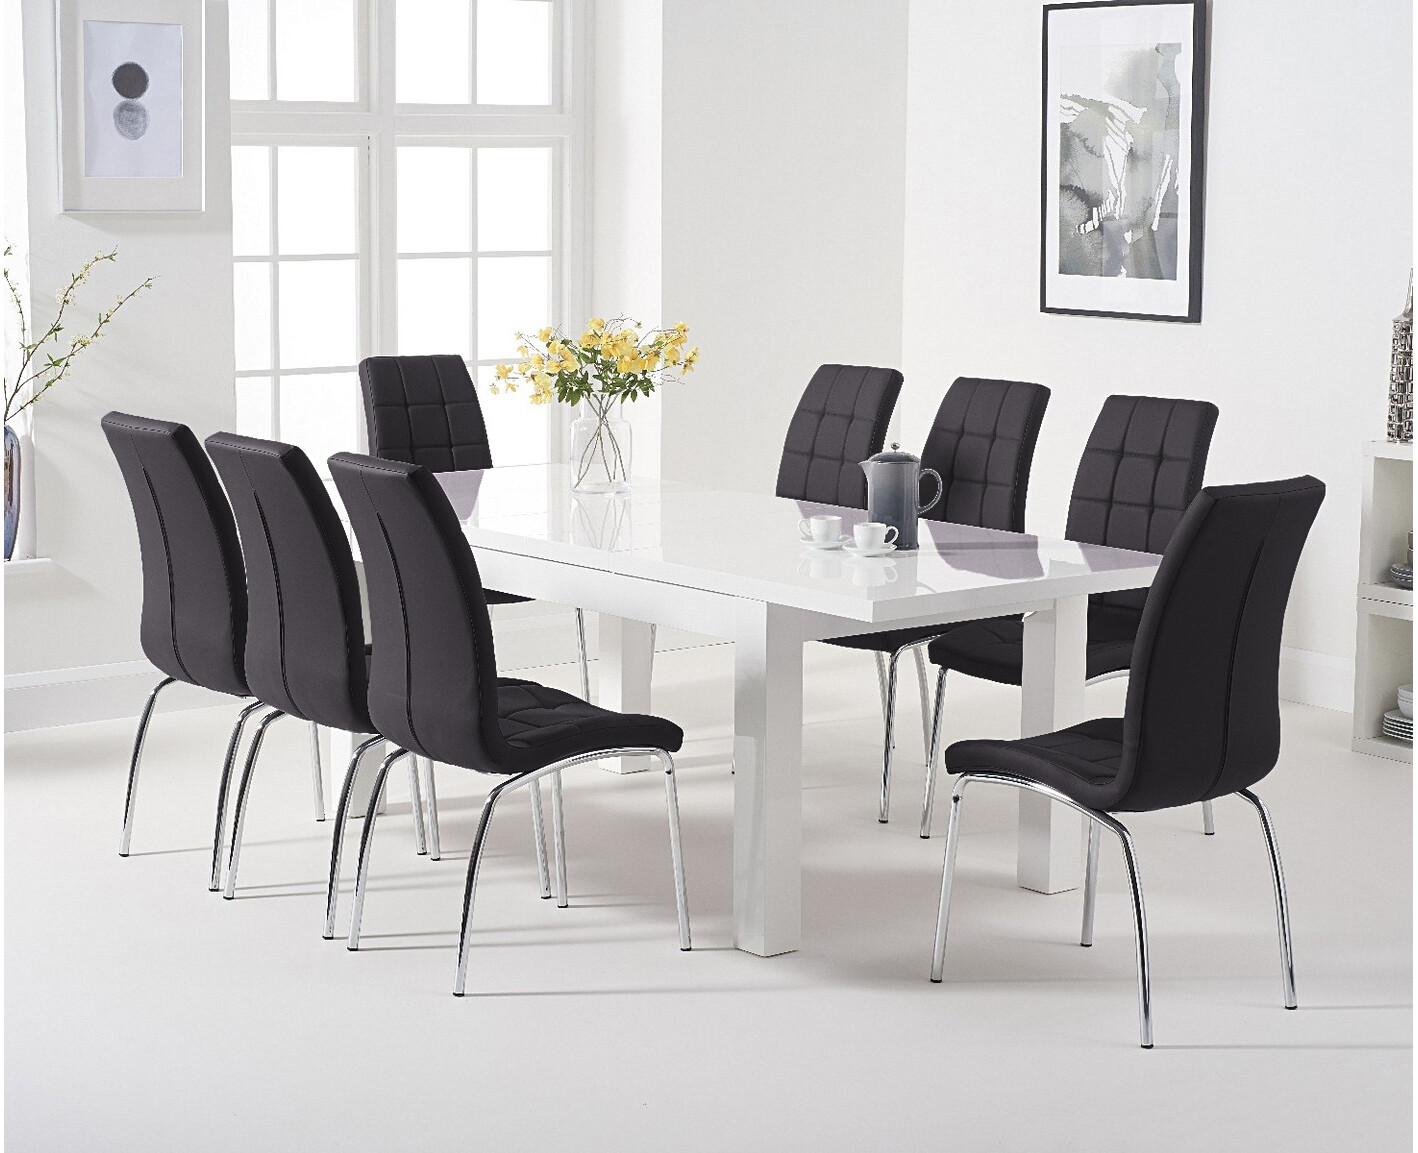 Photo 2 of Extending atlanta 160cm white high gloss dining table with 6 grey enzo chairs